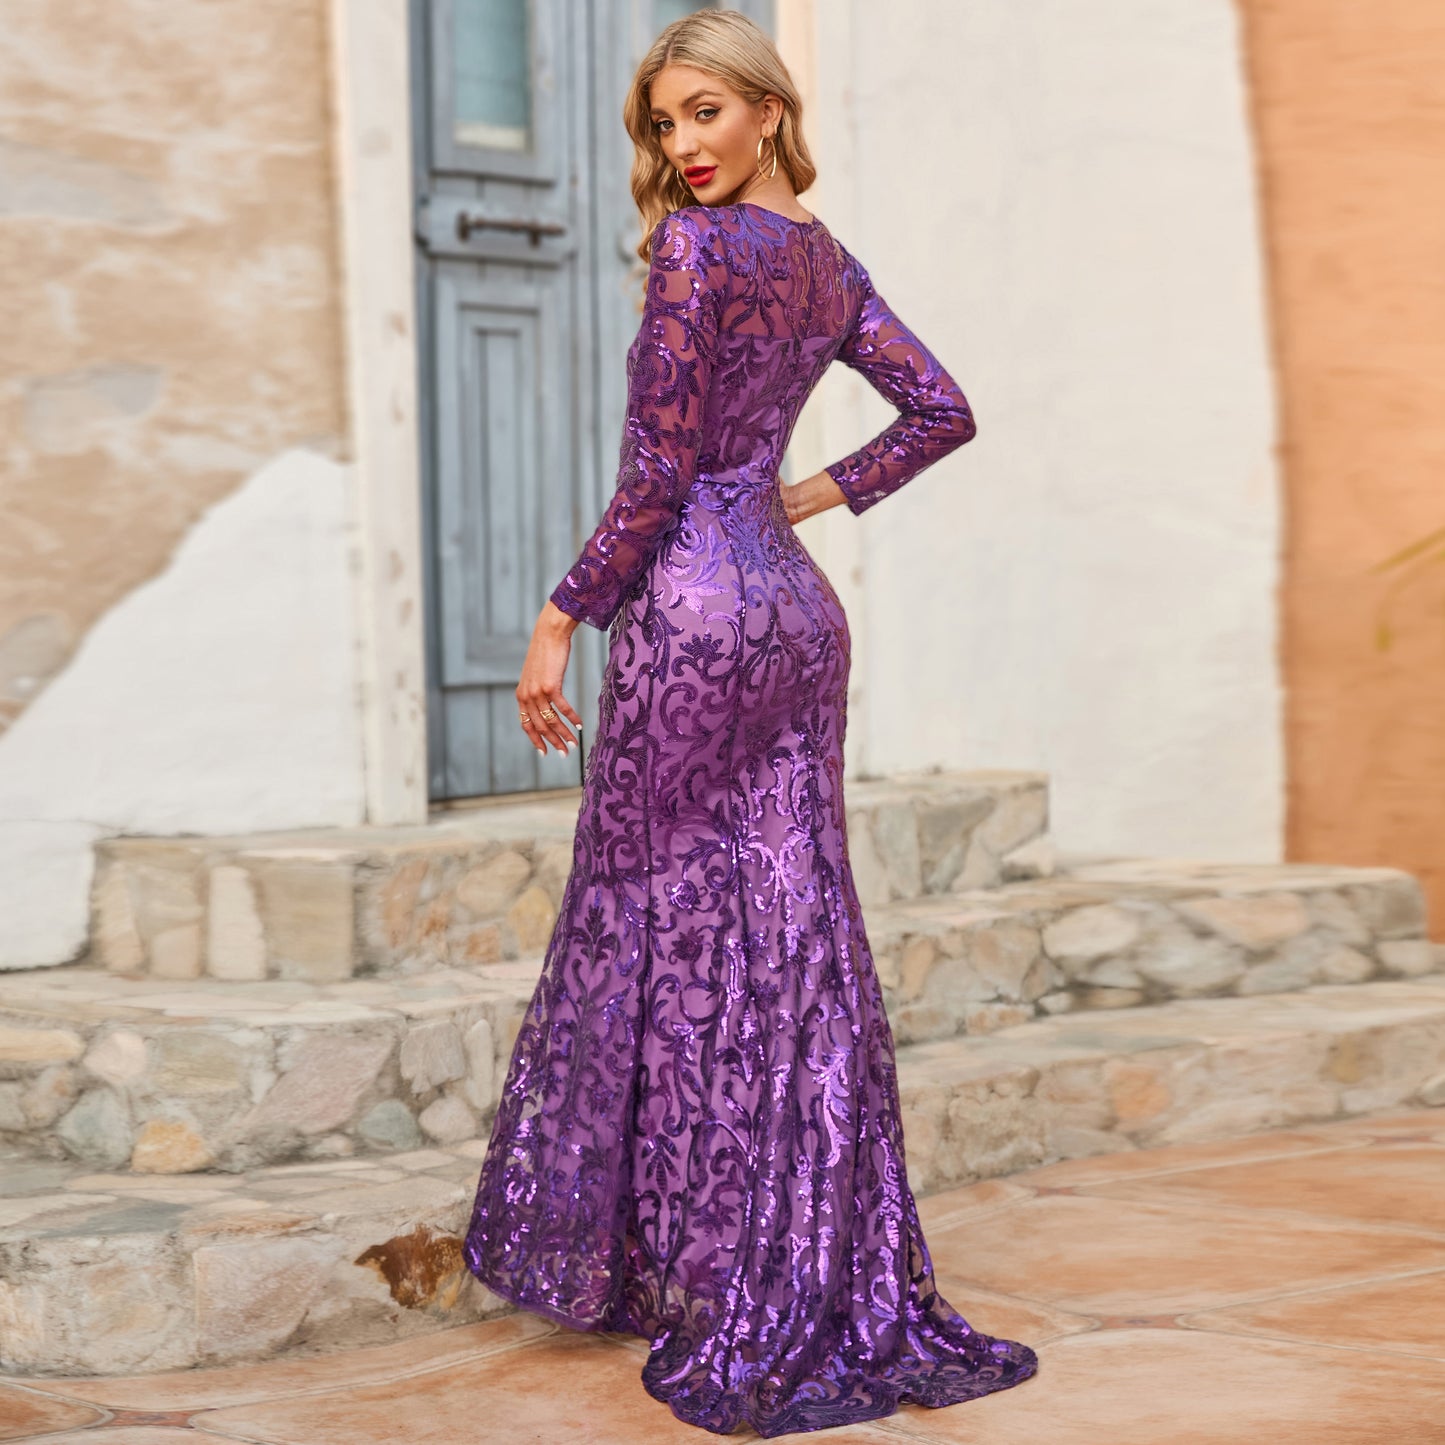 Gorgeous Ball Gown Evening Party Sequin Glitter Prom Dress